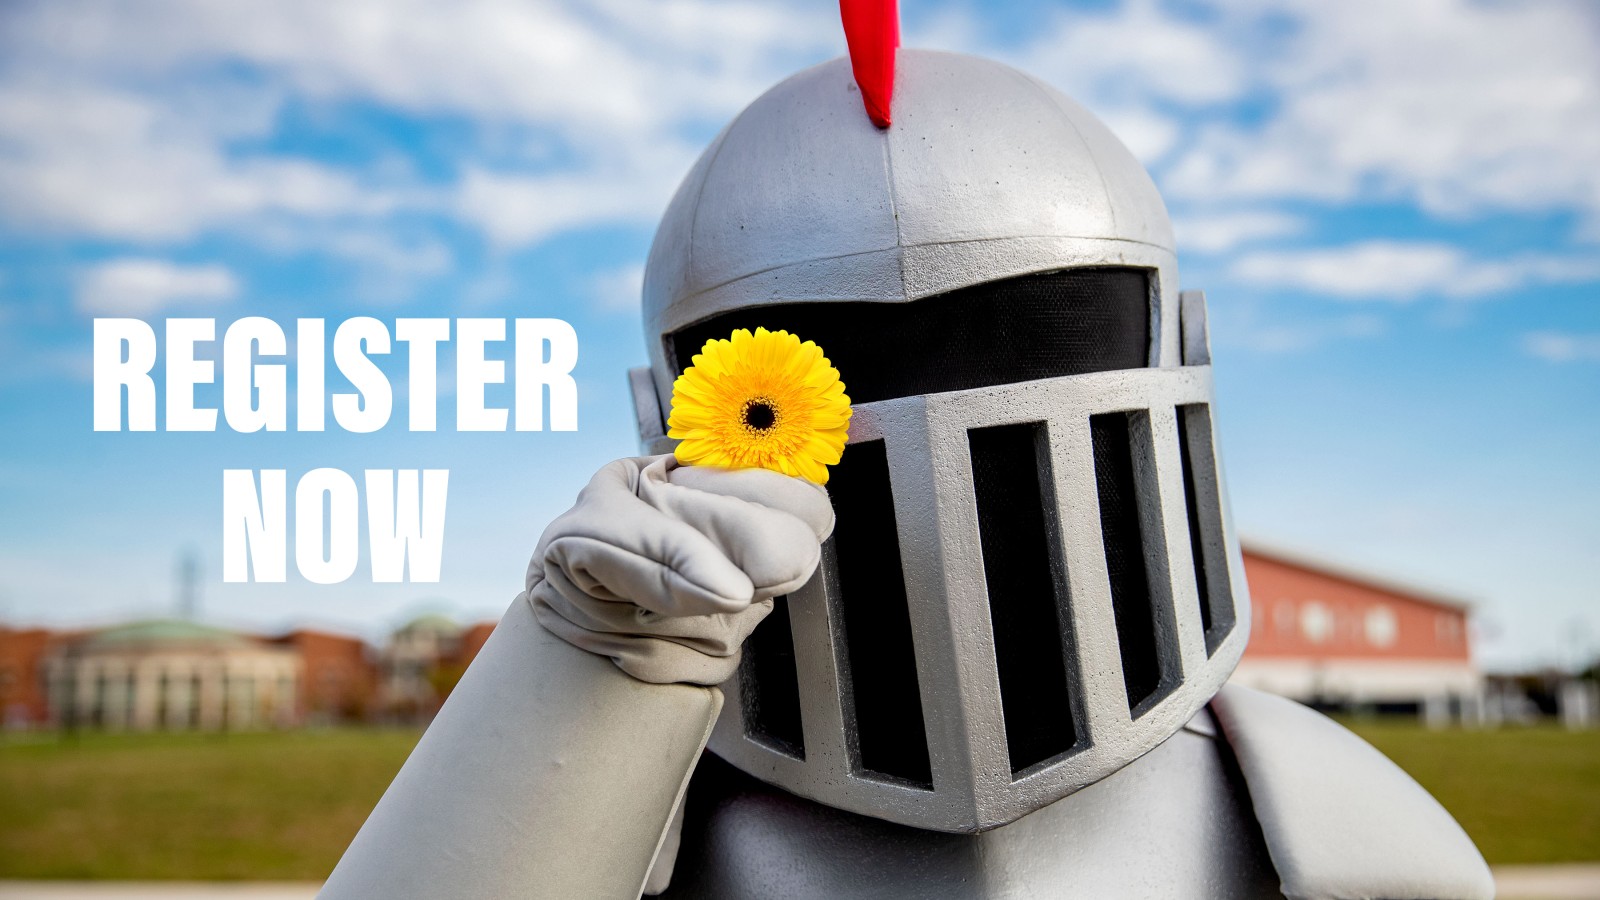 Barry the mascot holding a daisy with text saying register now